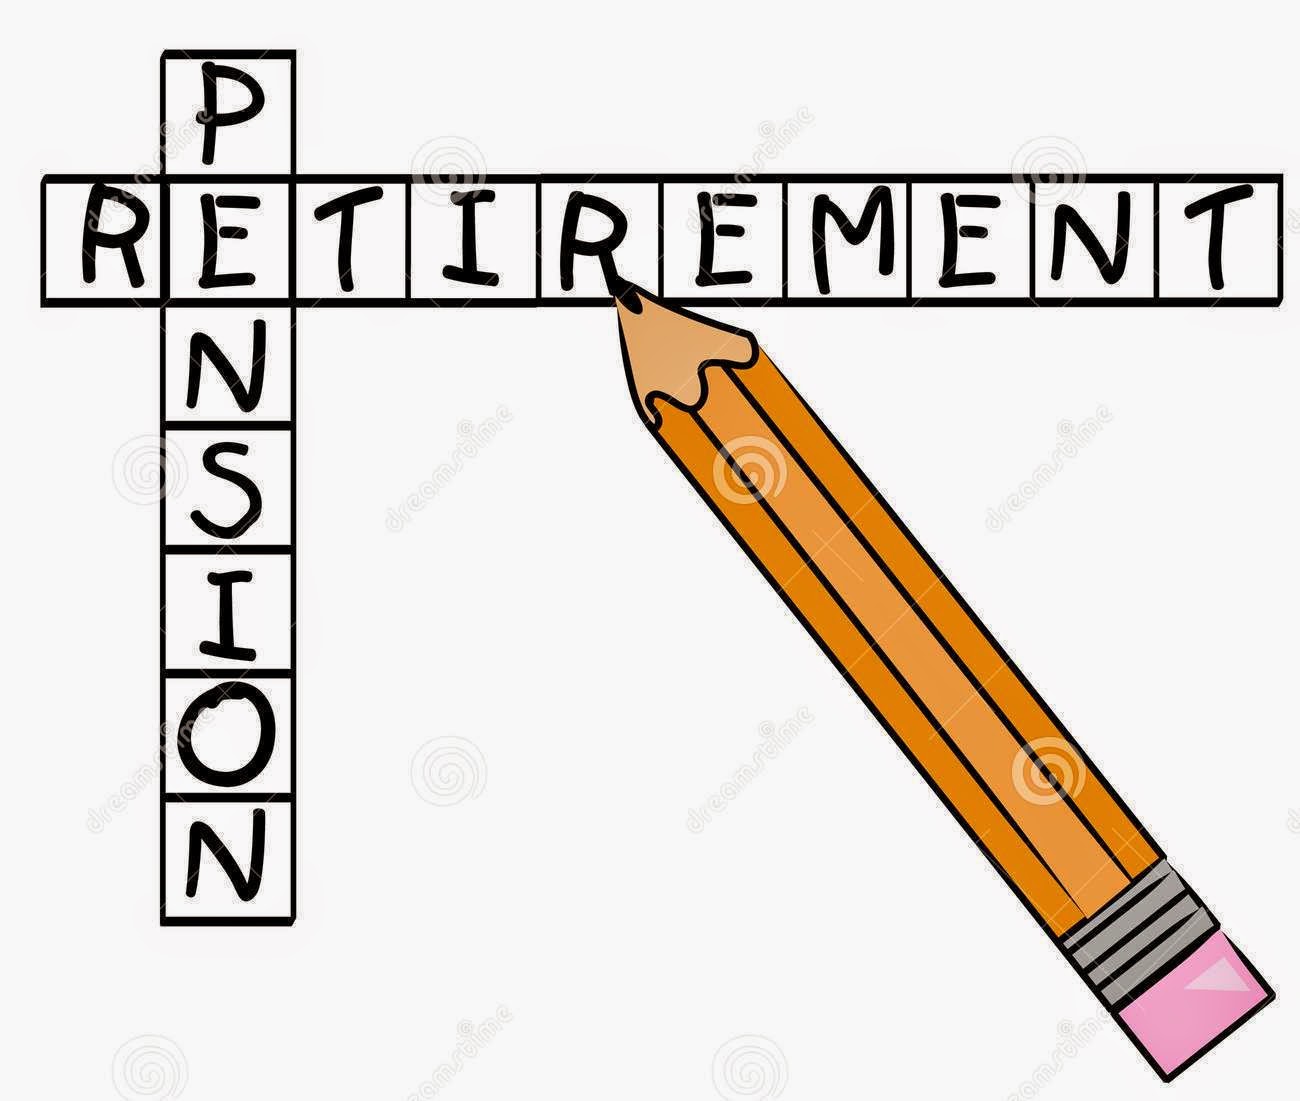 Retirement Planning - Pension Plans - wolf in sheep's clothing